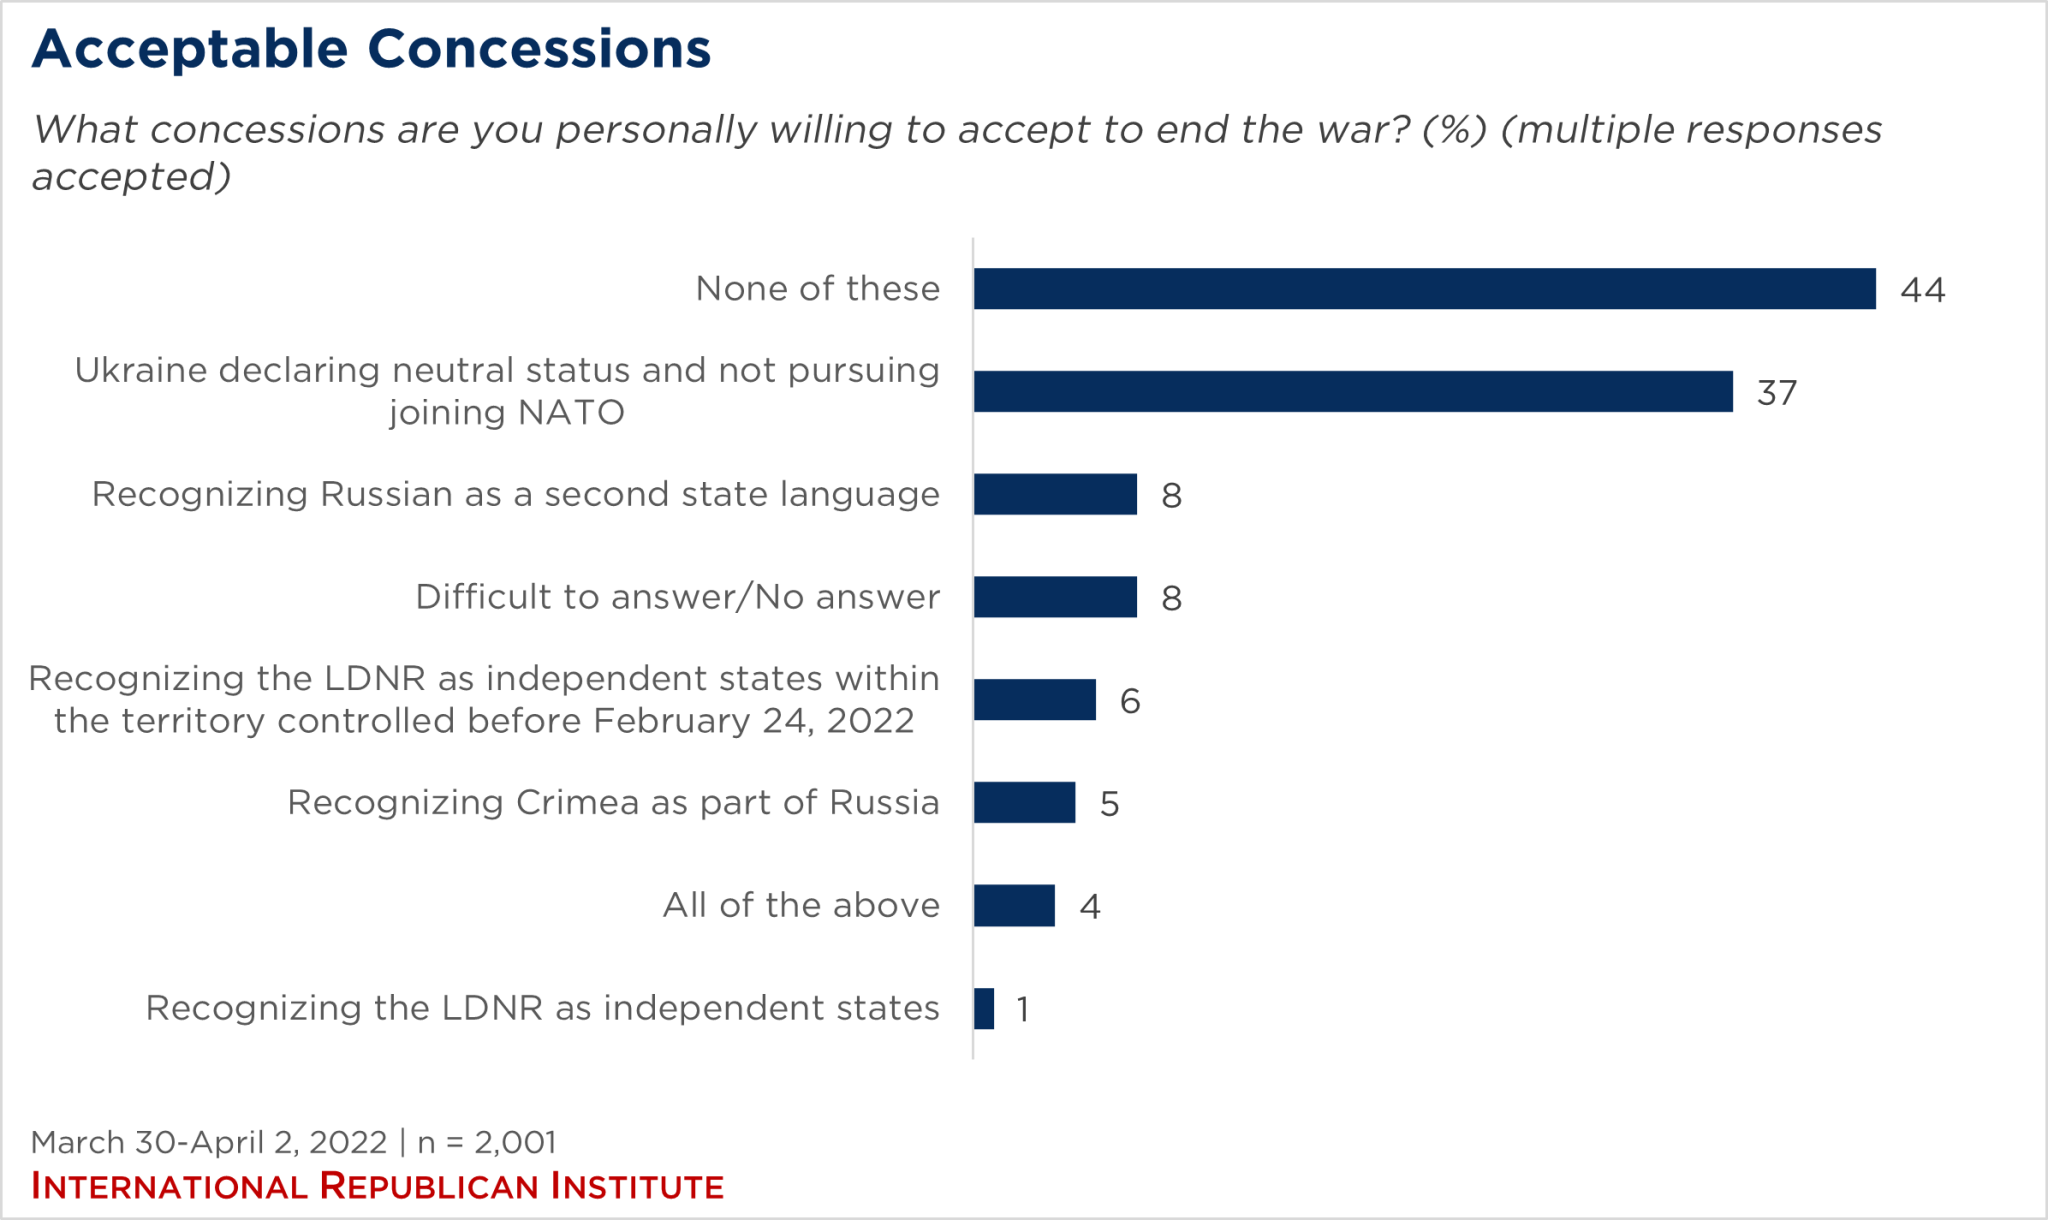 Bar graph showing public opinion of acceptable concessions to end the war